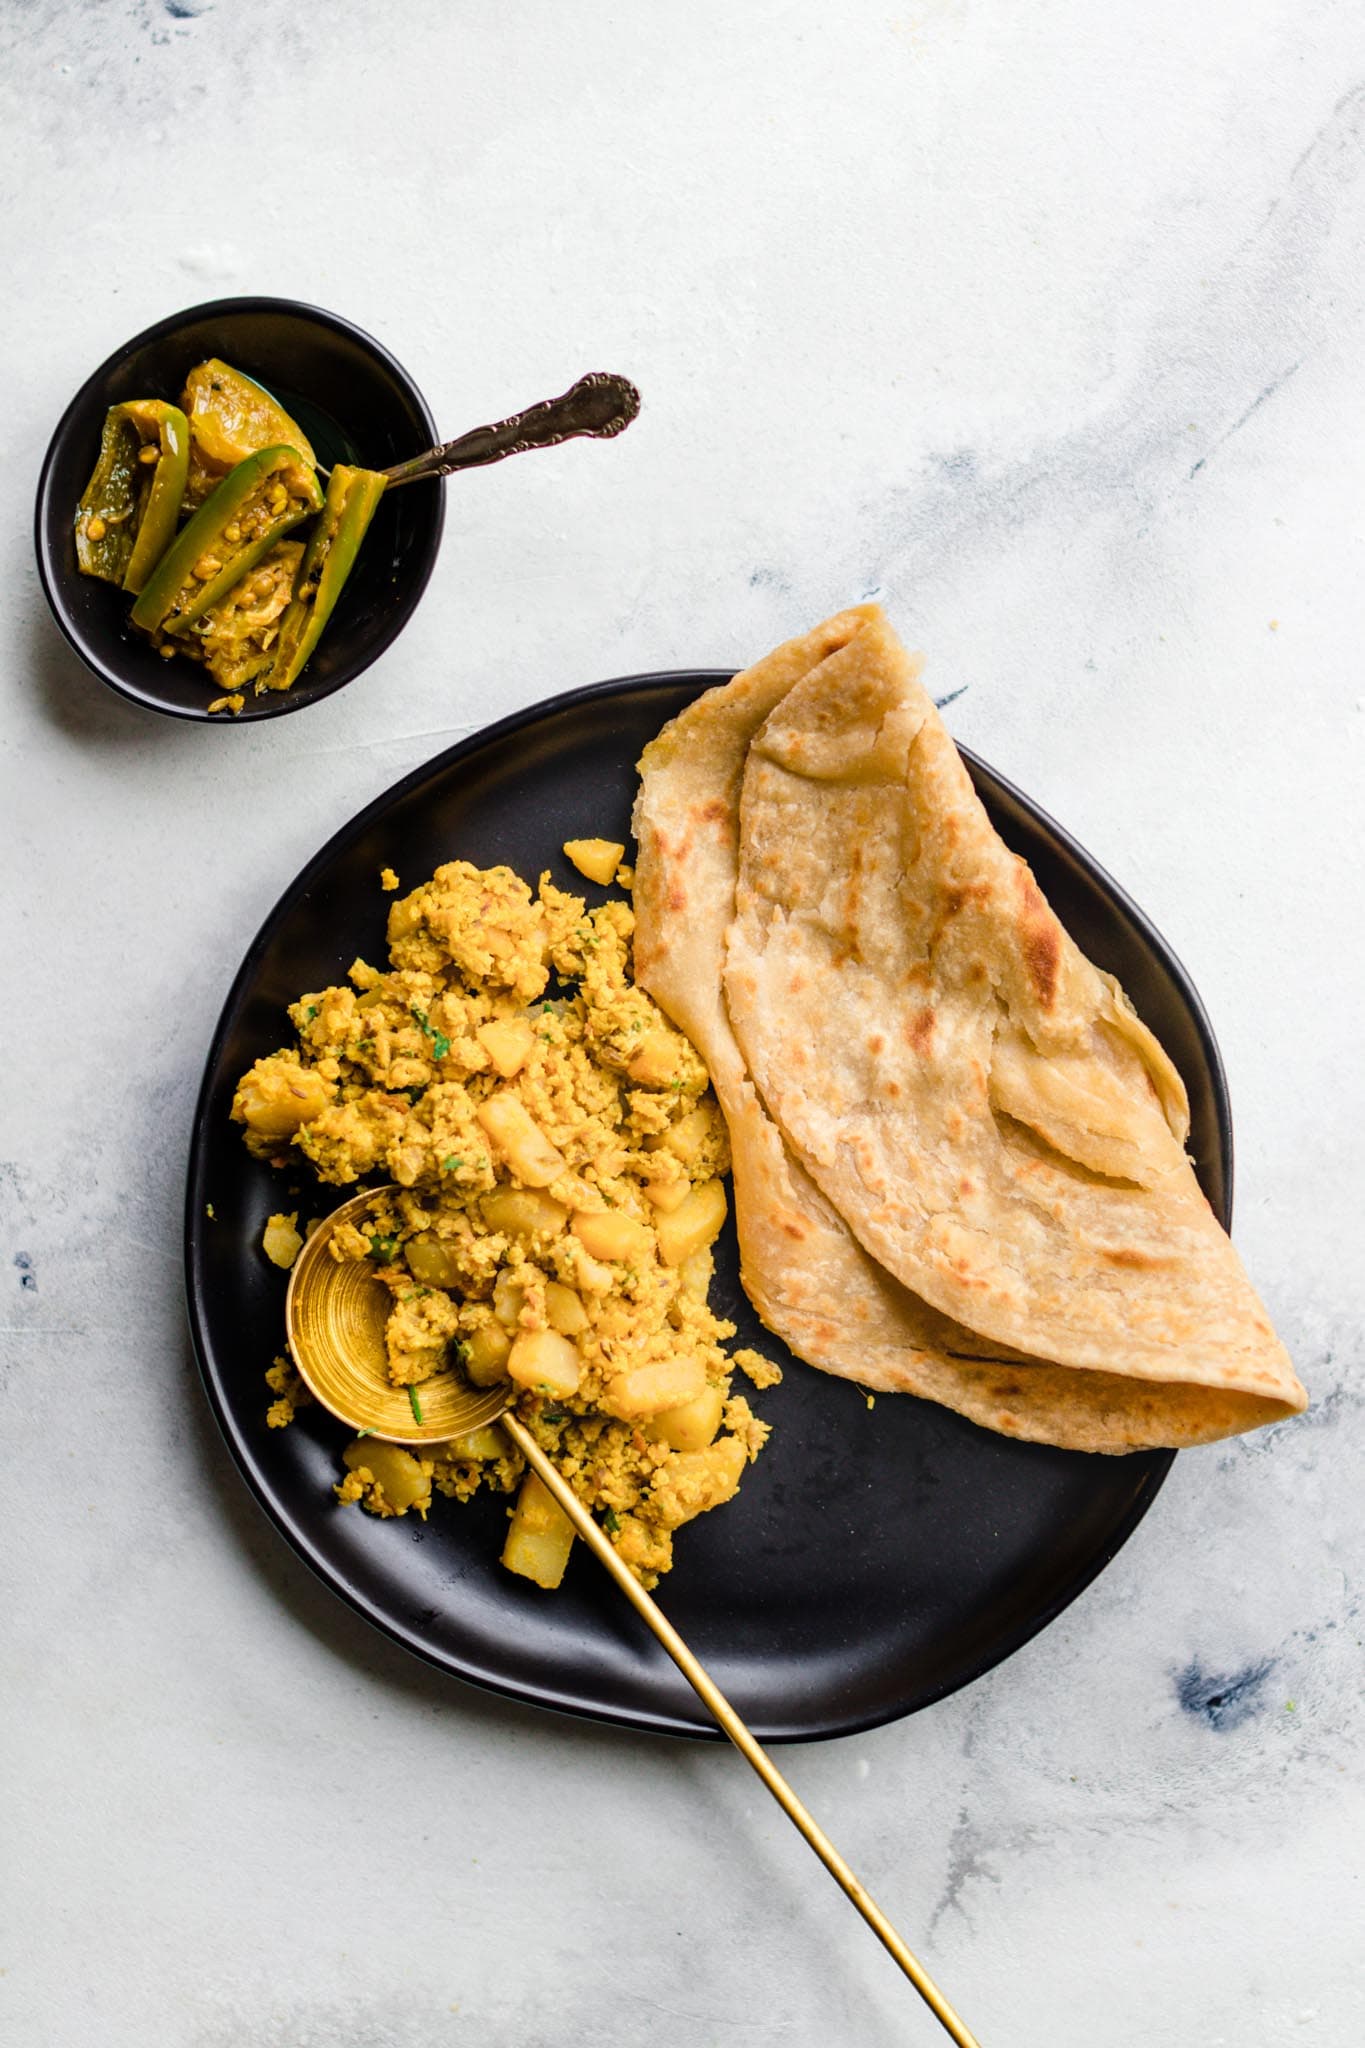 Scrambled Egg and Potato Curry with Paratha on a black plate with a side of achaar (mixed pickle)